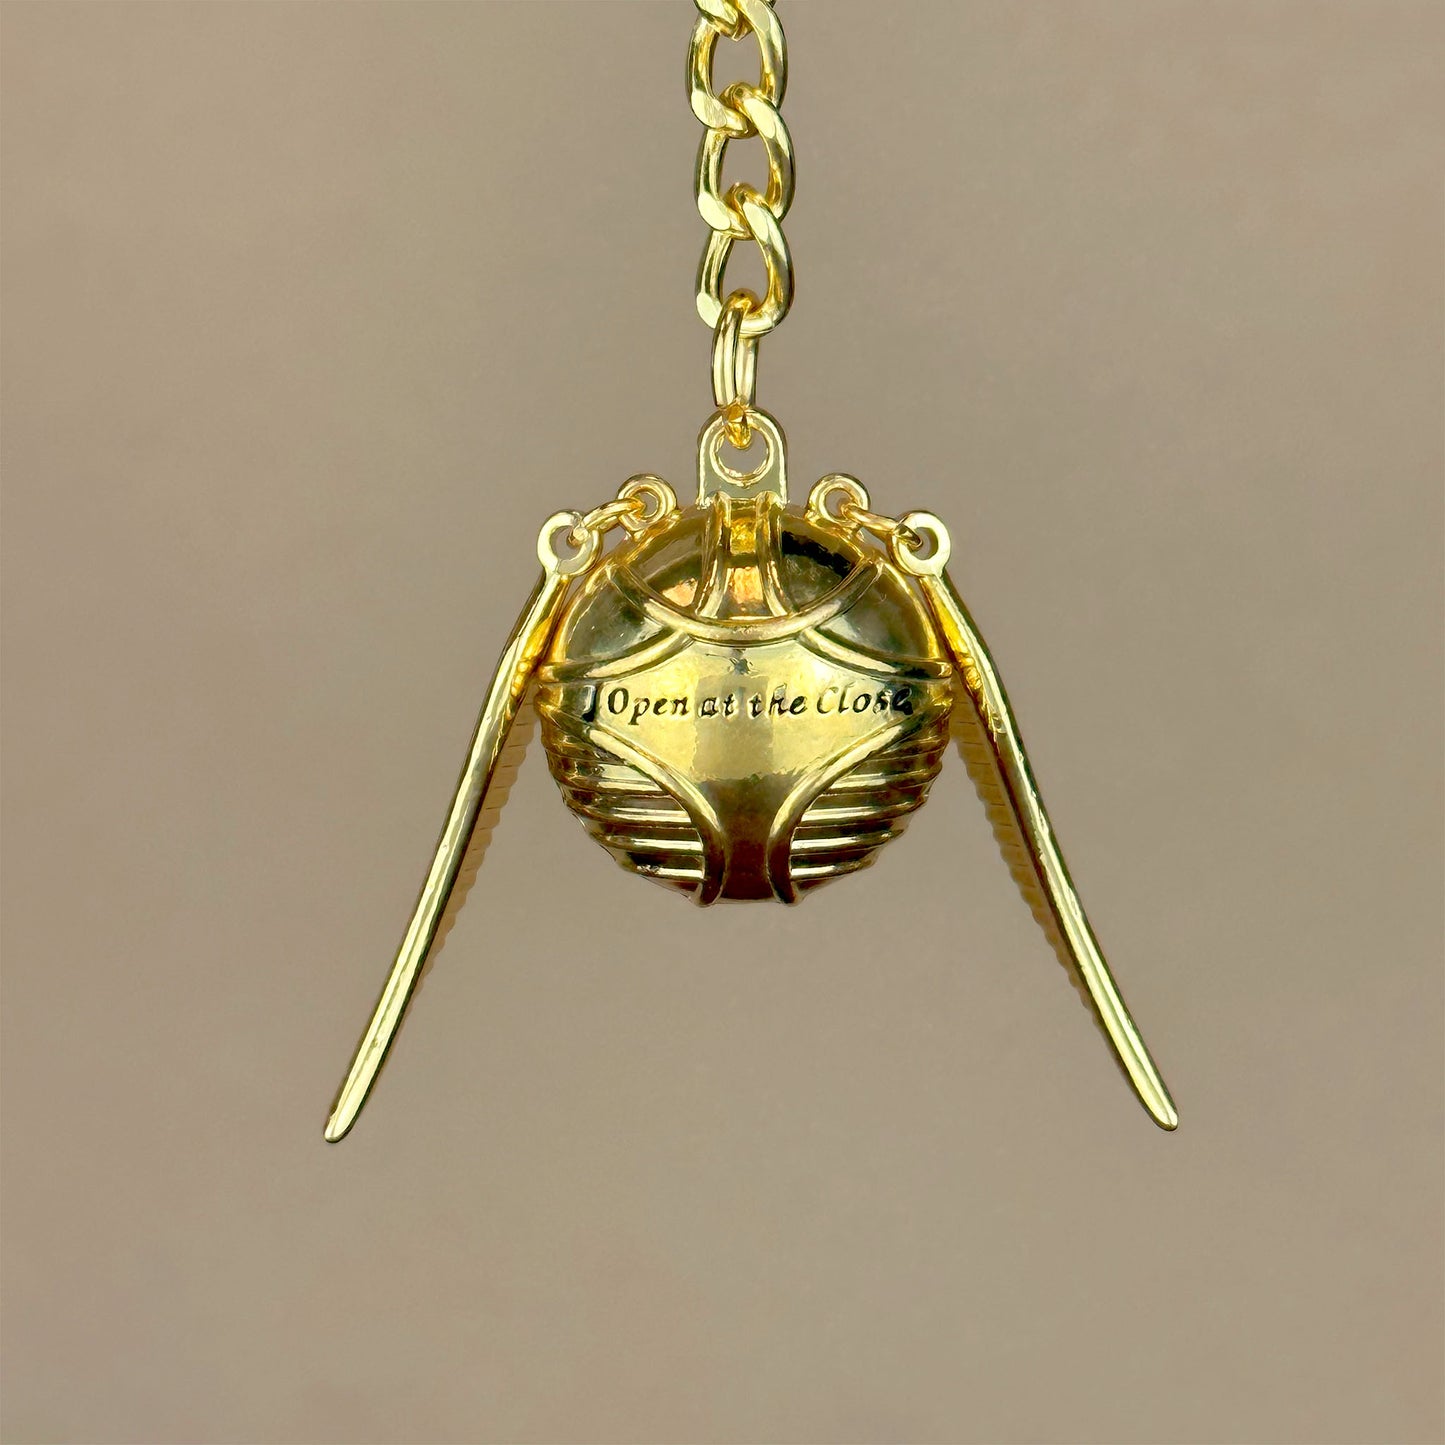 Golden Snitch (Harry Potter) 3D Keychain